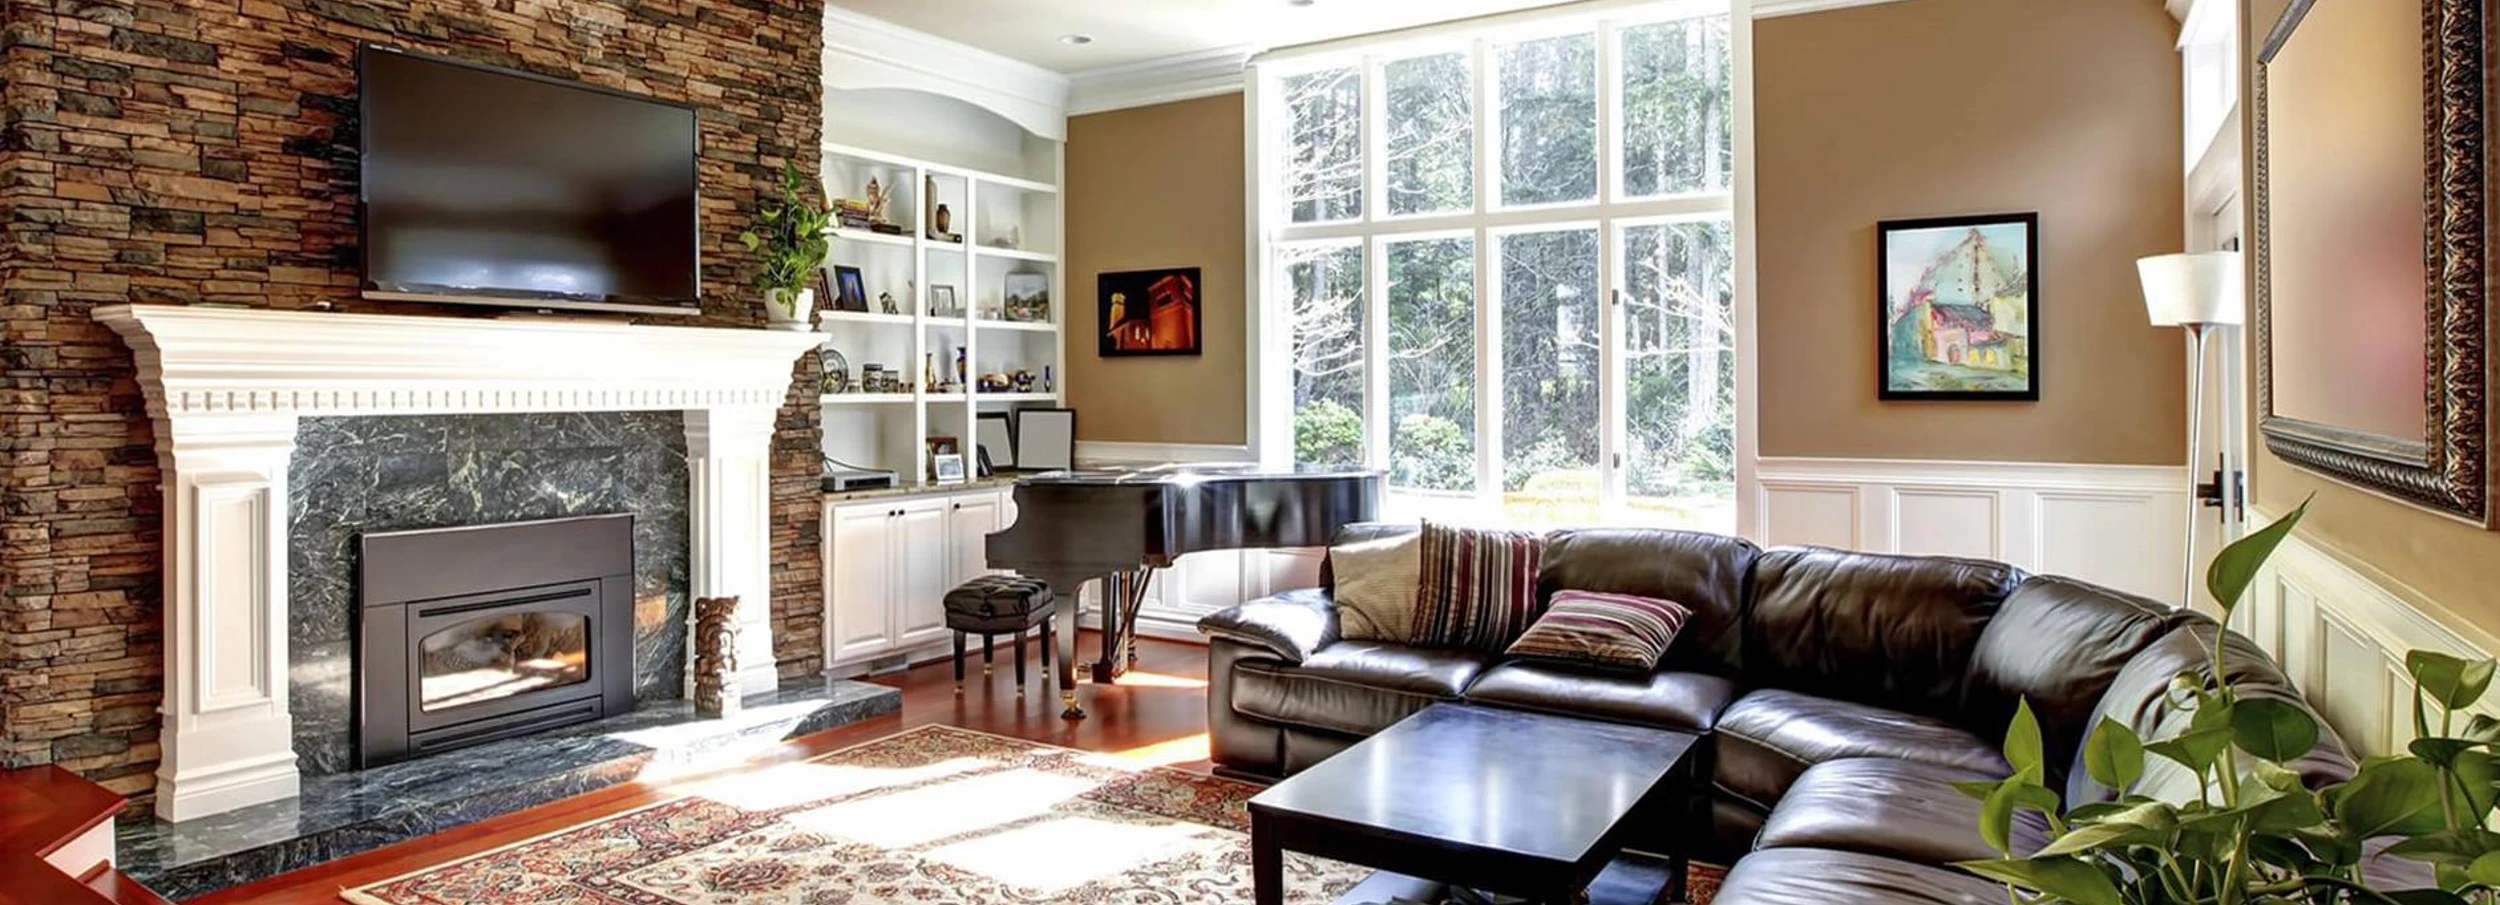 Brown themed living room with leather sofa and brick fireplace.